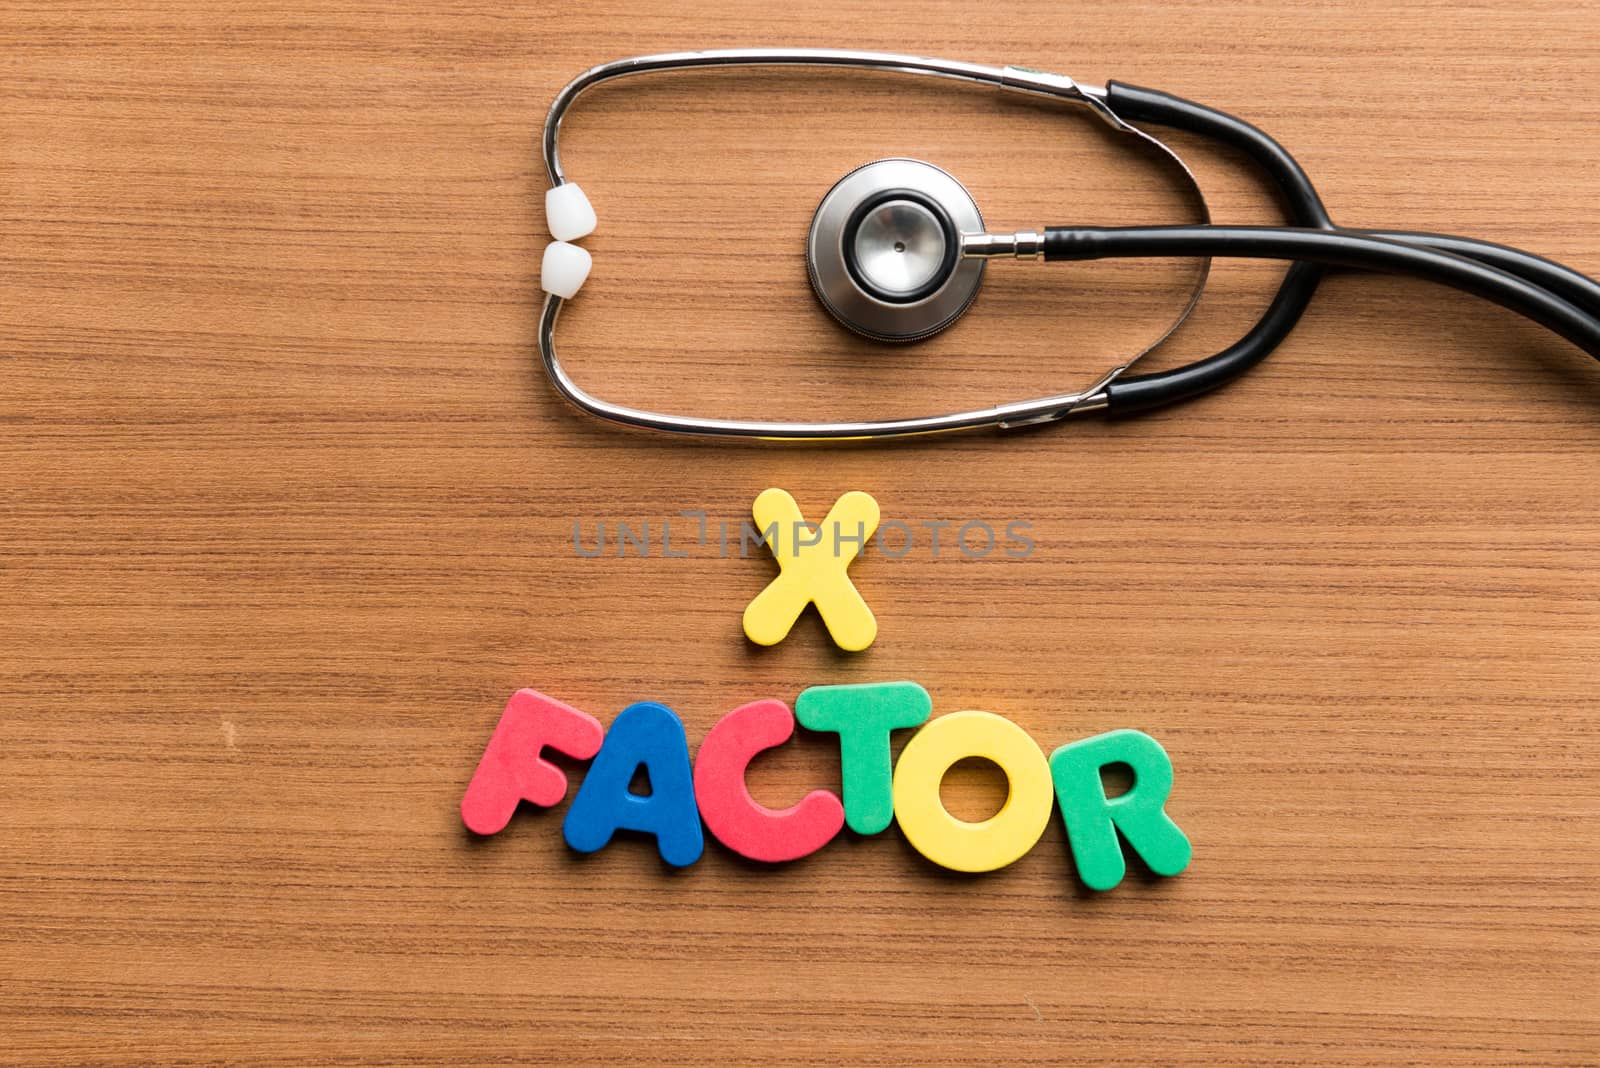 x factor colorful word with stethoscope by sohel.parvez@hotmail.com